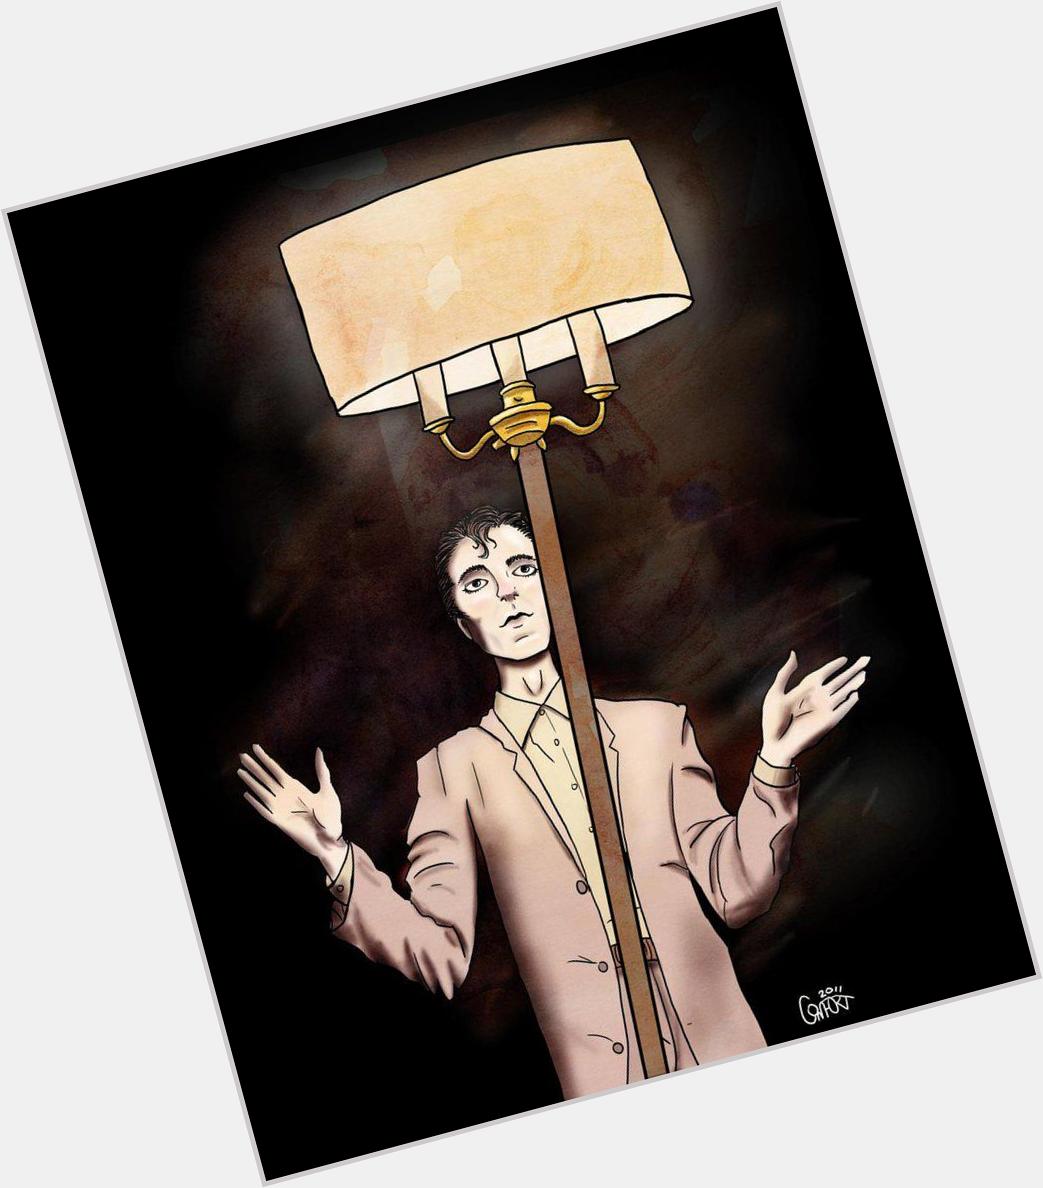 Happy Birthday David Byrne.  Listen to today & watch him dance with a lamp  